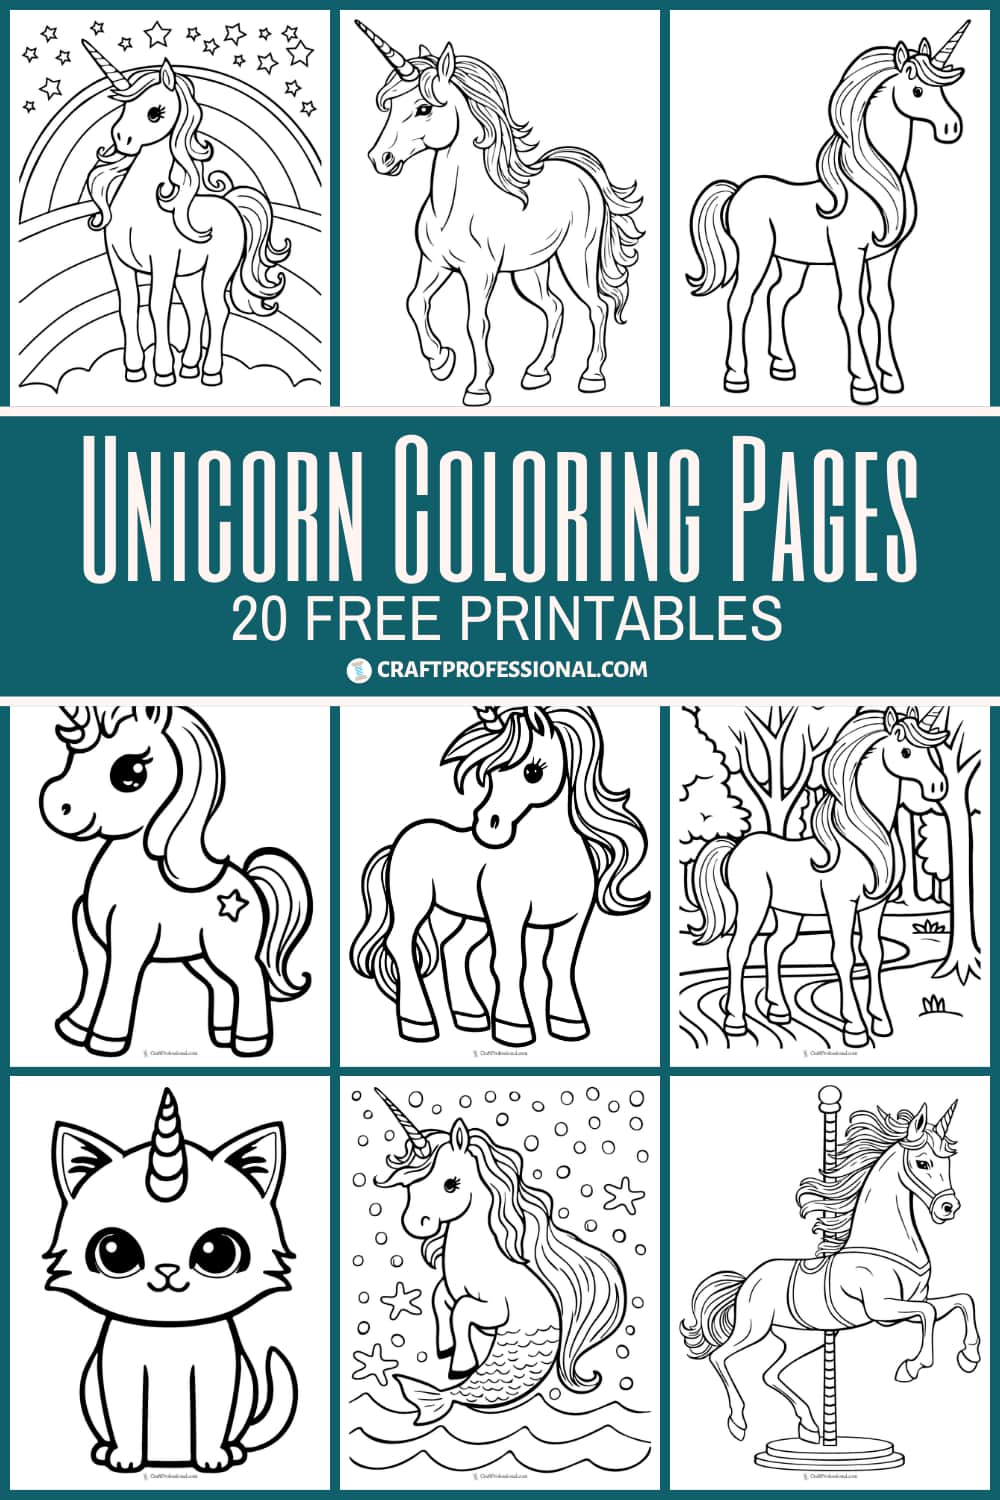 20 free unicorn coloring pages for kids and adults